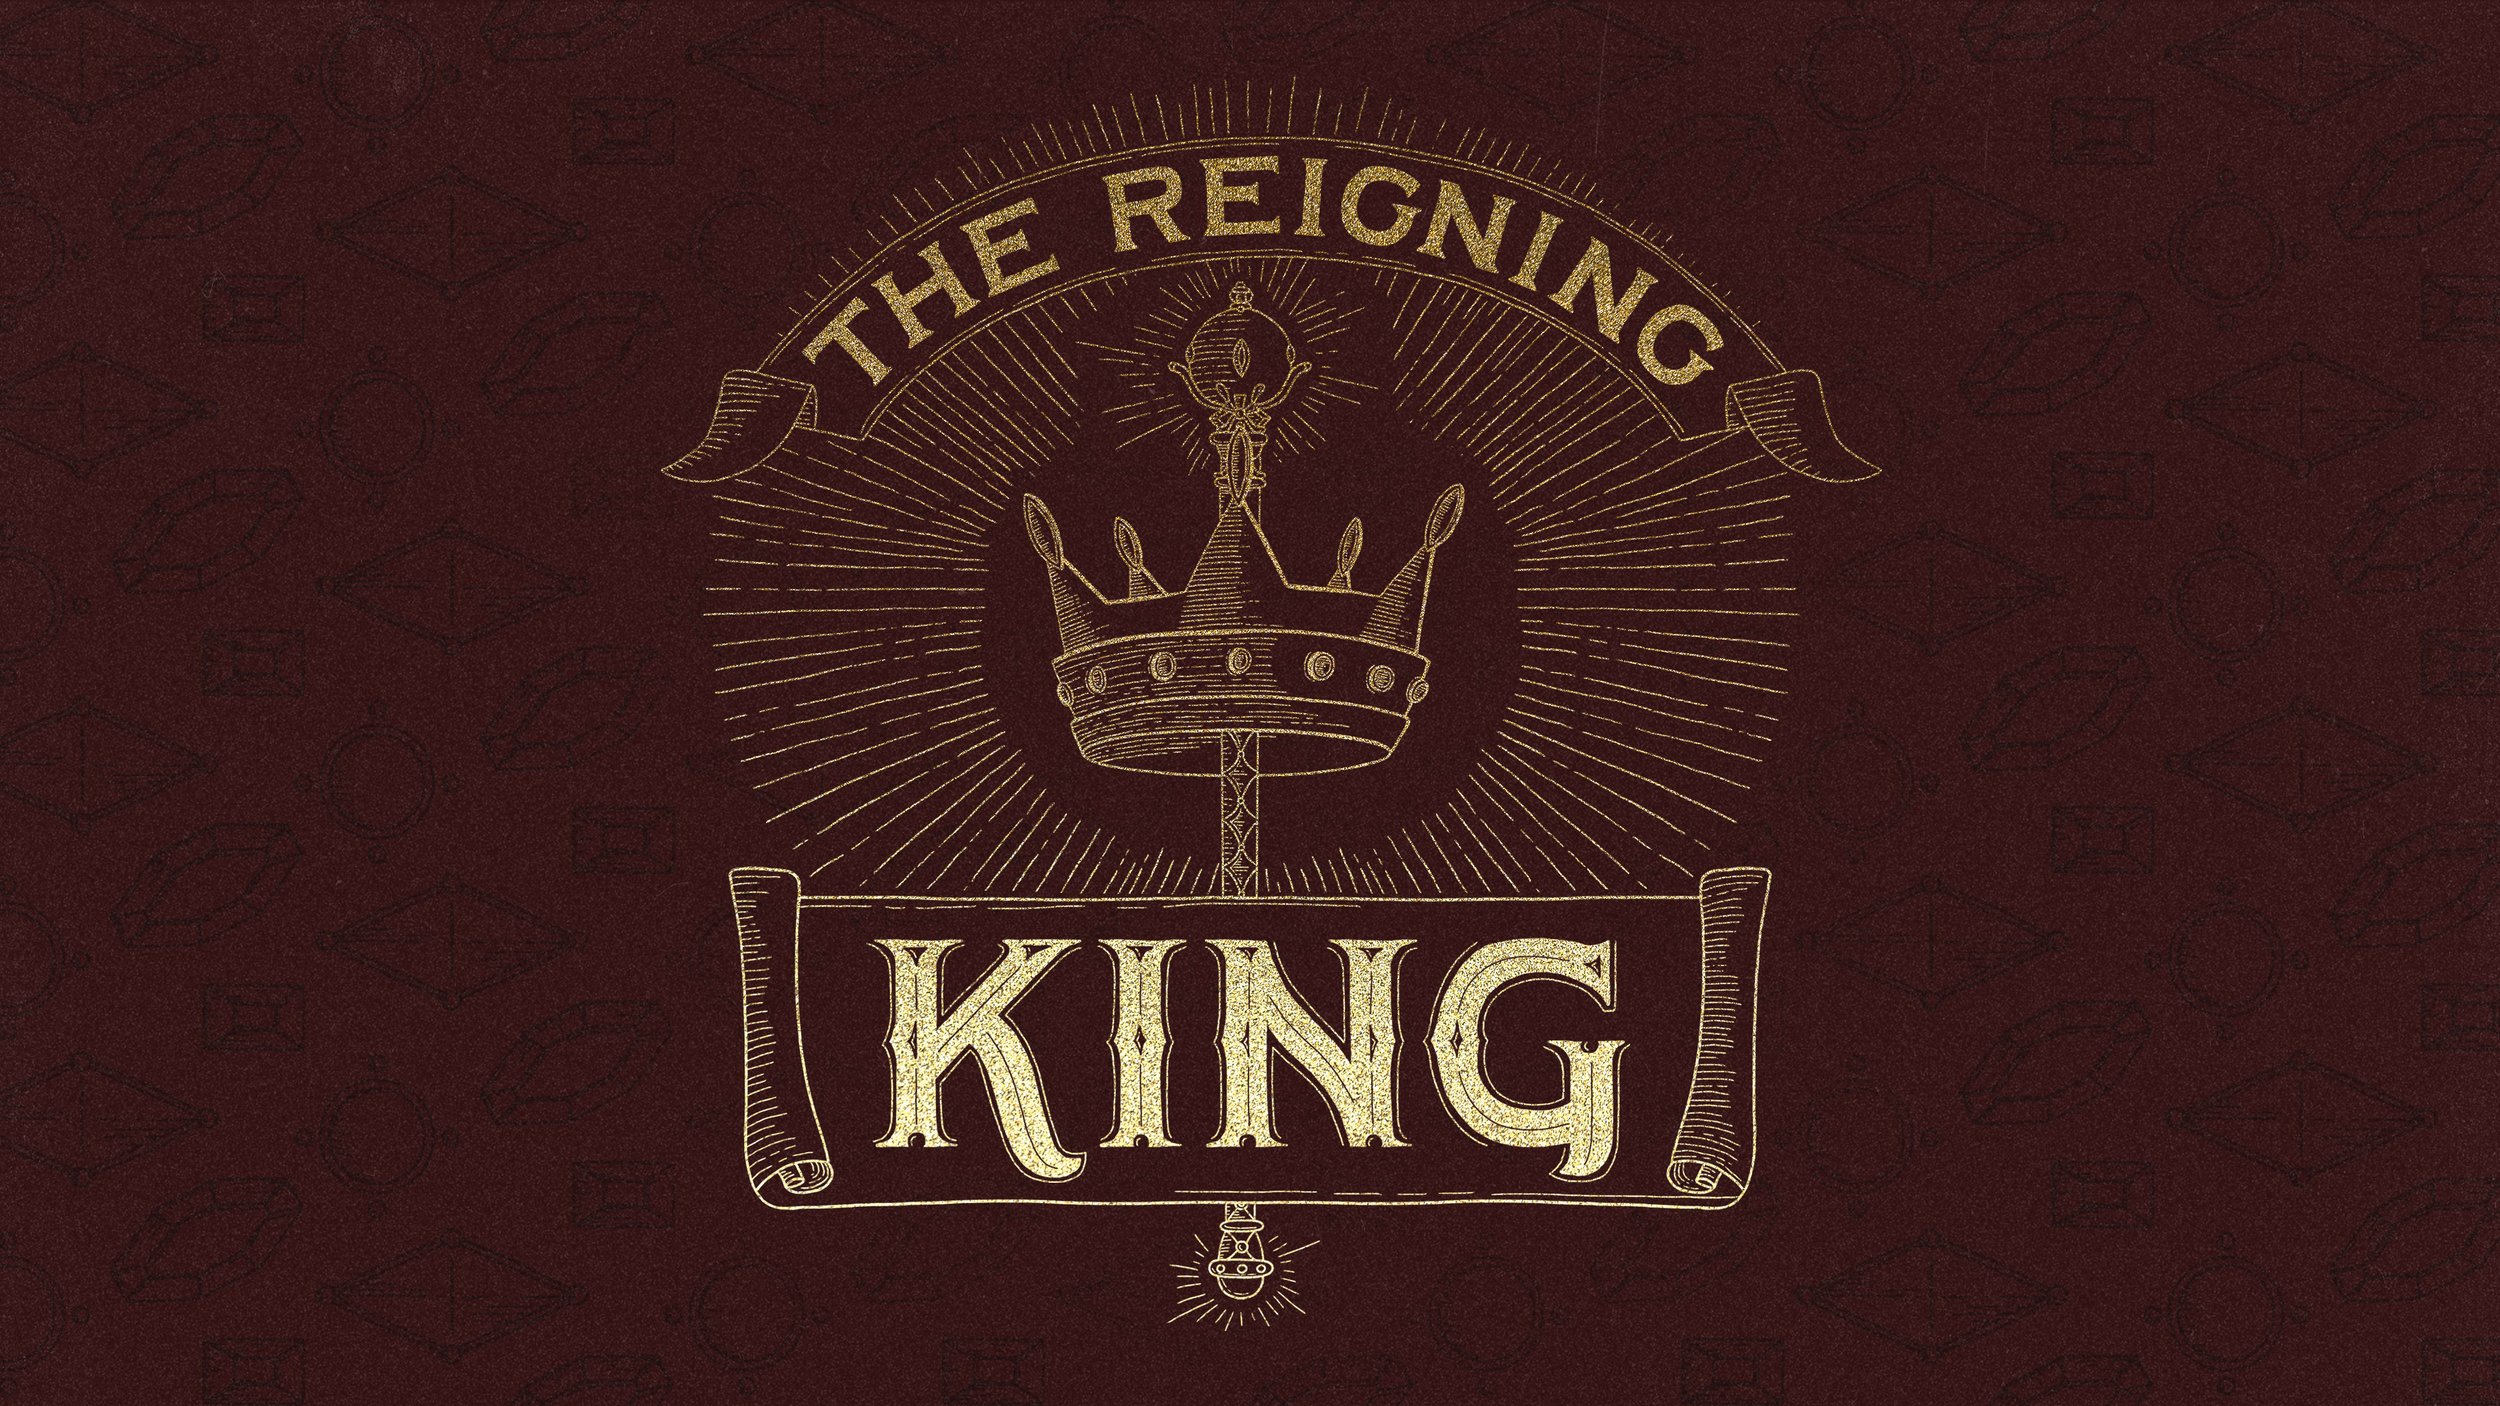 The Reigning King